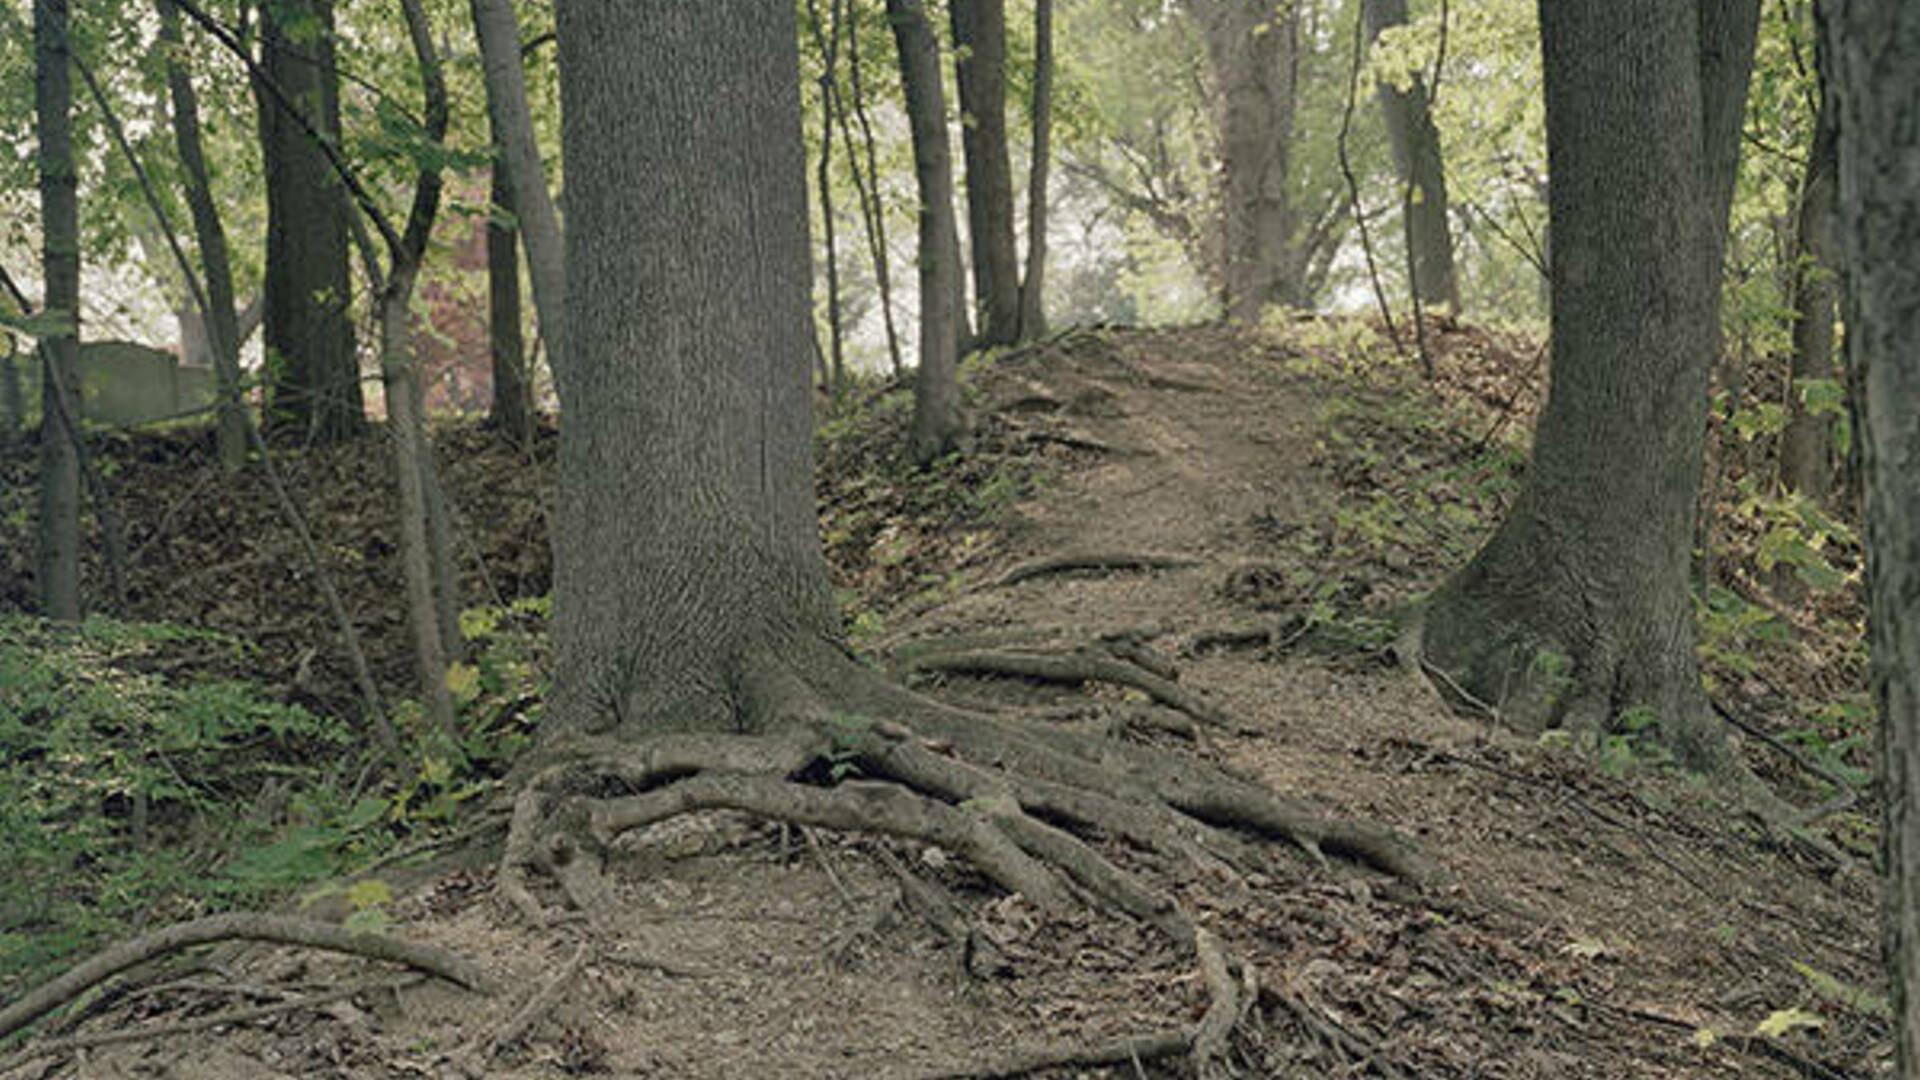 Kay Westhues, (American, b. 1961), <em>Footpath to Portage Landing</em>, 2015, archival pigment photograph, 30 x 20 inches. Courtesy of the artist. (detail)